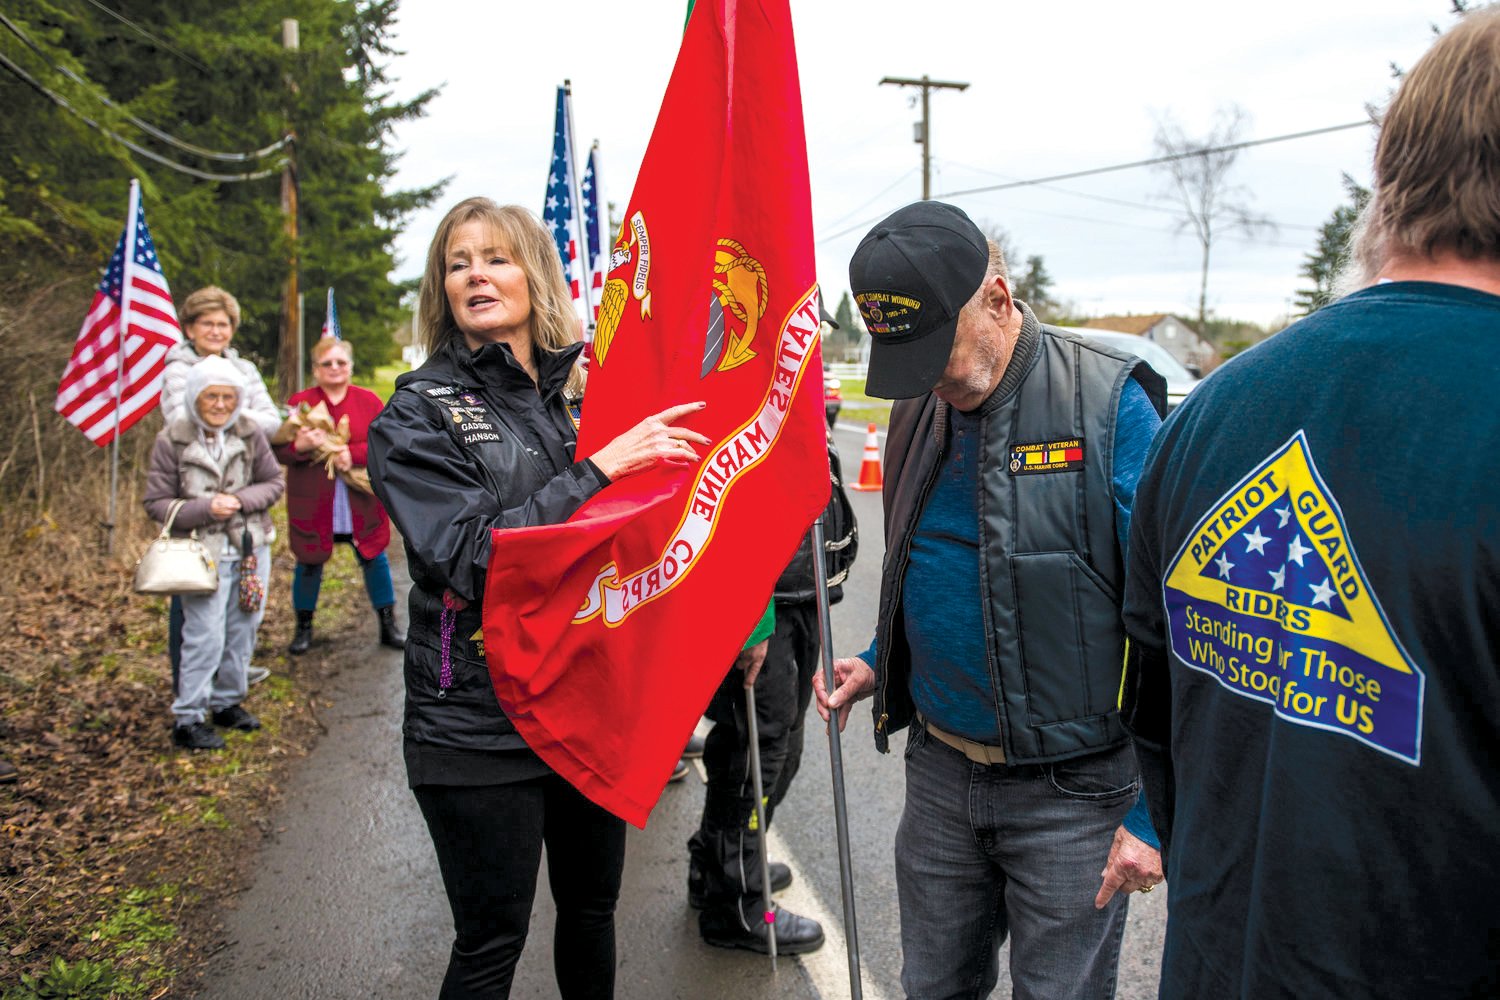 Marine Corps veteran Roger Flinn, right, lowers his head as Mary Astrid, center left, talks about his service before the unveiling of a "Purple Heart County" sign in the 3900 block of Harrison Avenue in Centralia in 2020.